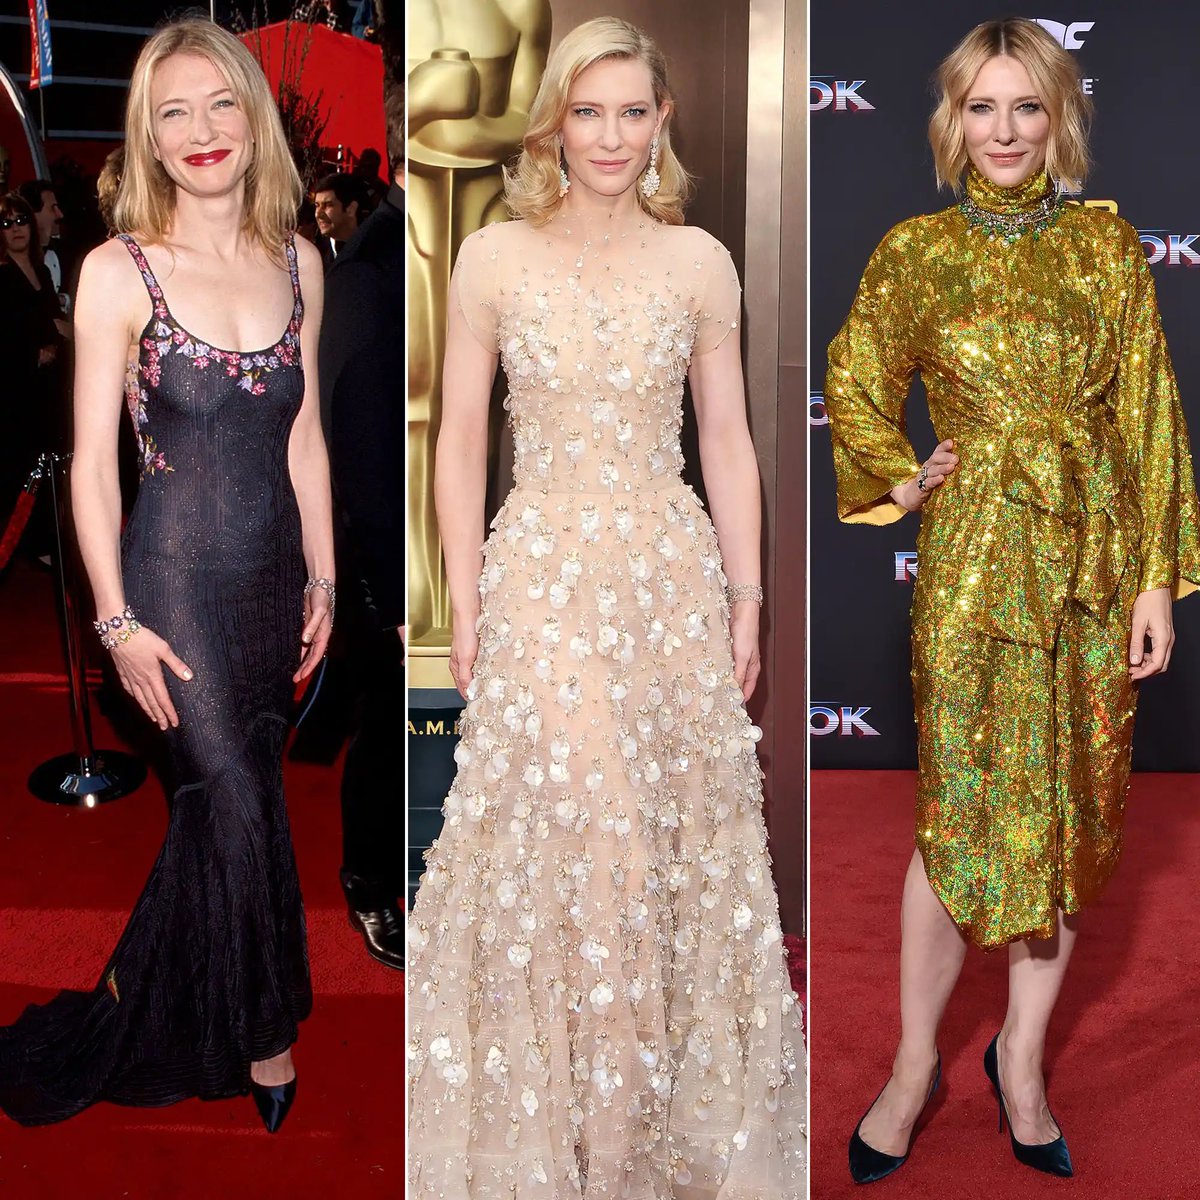 Can someone help “middle class” me, what to wear at my next red carpet event? Maybe tips from “middle class” Cate Blanchett will help. 🤔 #OutOfTouch #MiddleClass #CateBlanchett #Privilege